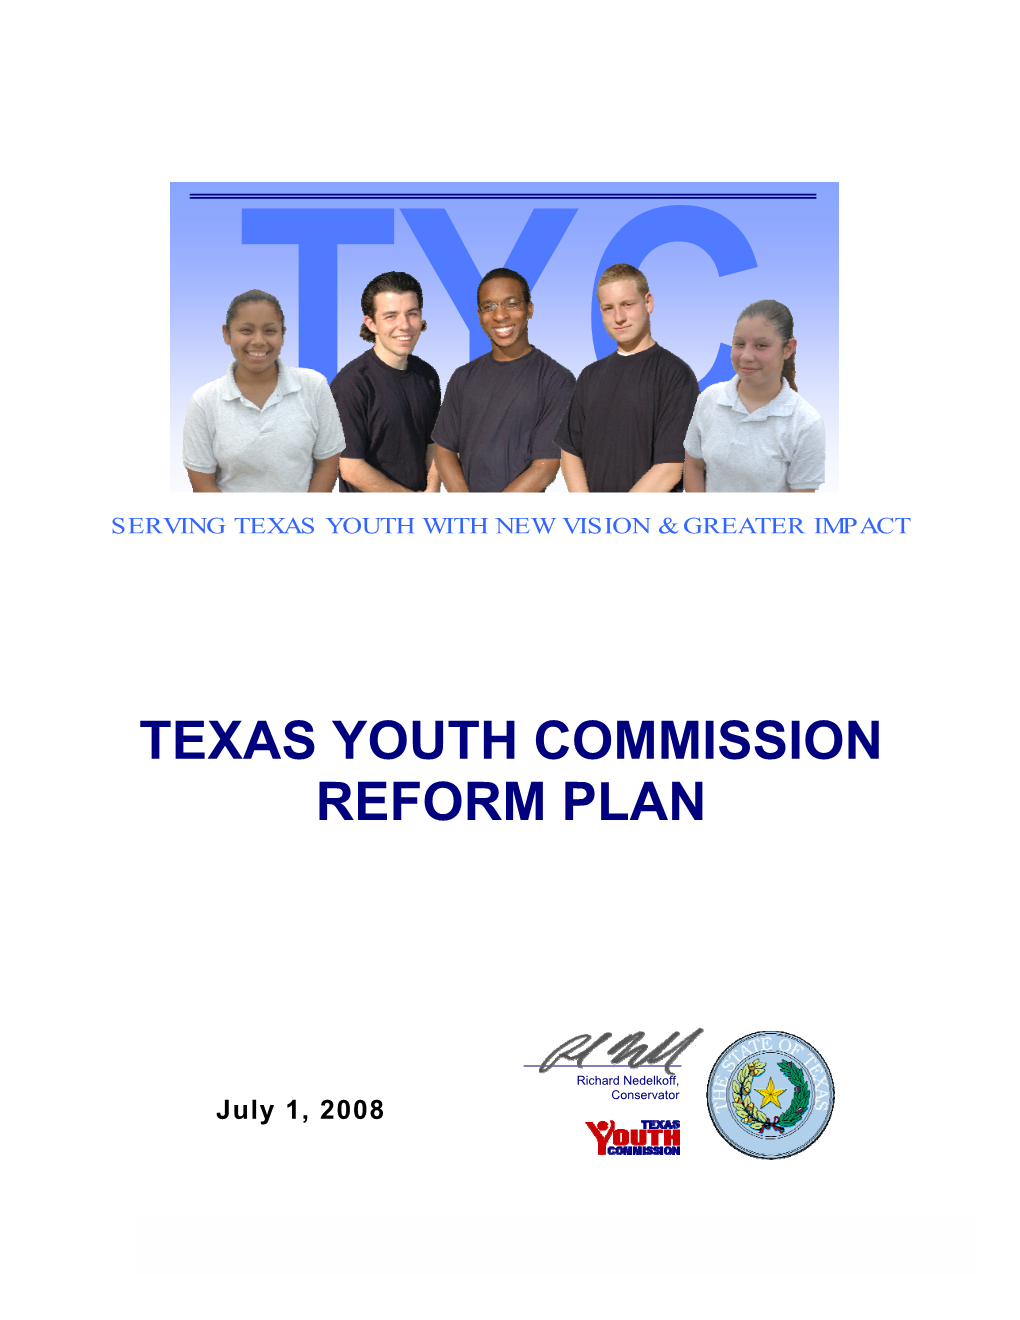 Texas Youth Commission Reform Plan